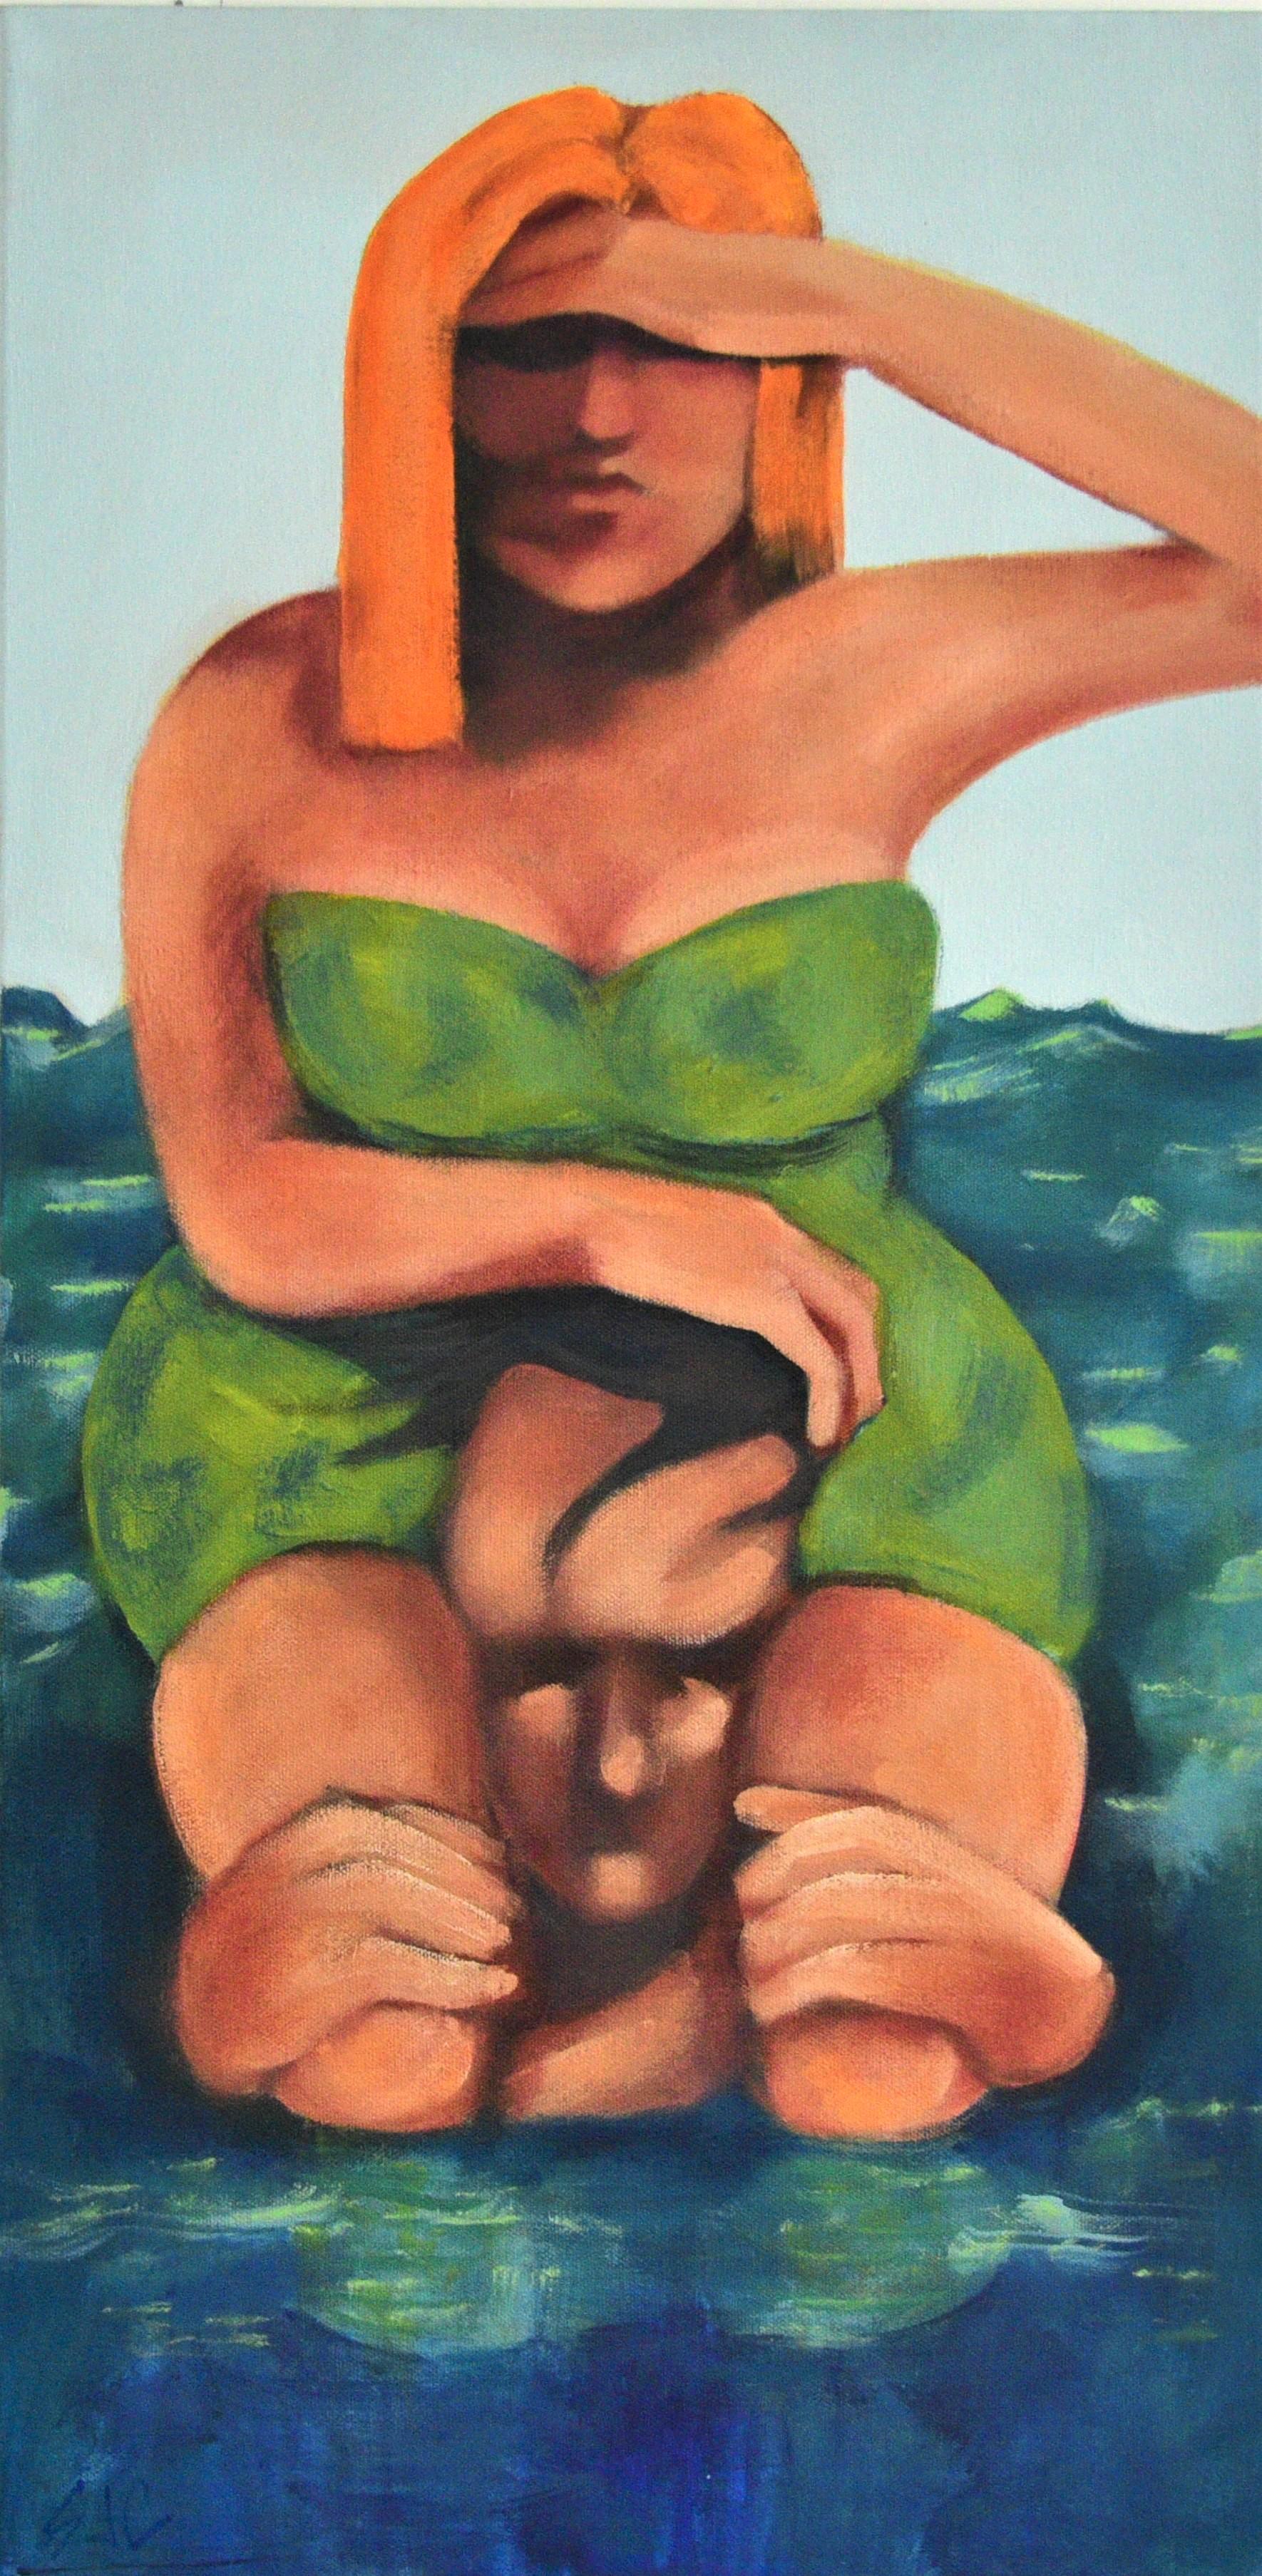 "Al N Pussykat Went To The Sea In A Lime Green Suit"  is from Sandra Jones Campbell's recent collection, "Sea La Vie"," a series that displays her unique vision of the world and is informed by her current social observations. It is custom framed and